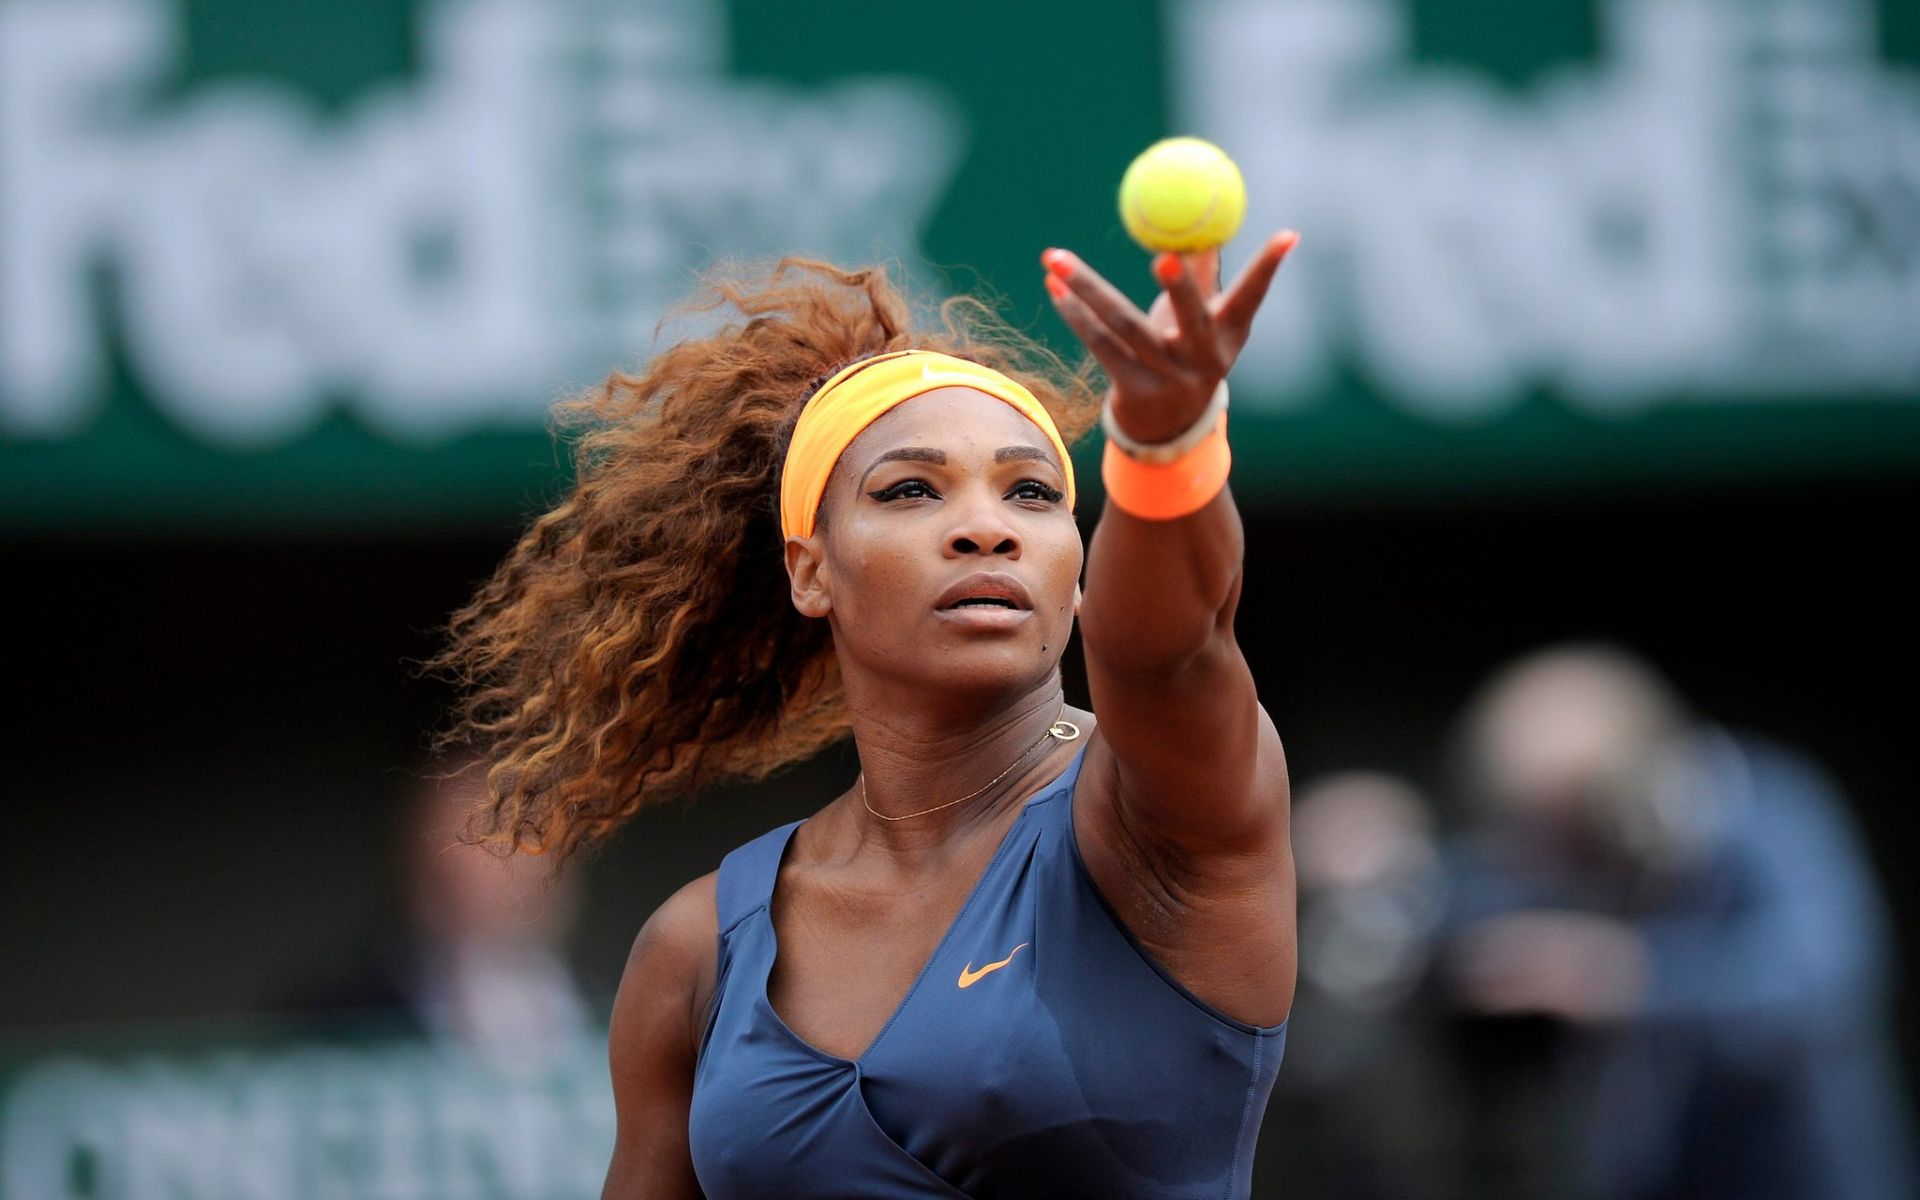 Serena Williams Wrote an Open Letter Encouraging Female Athletes to "Push for Greatness"